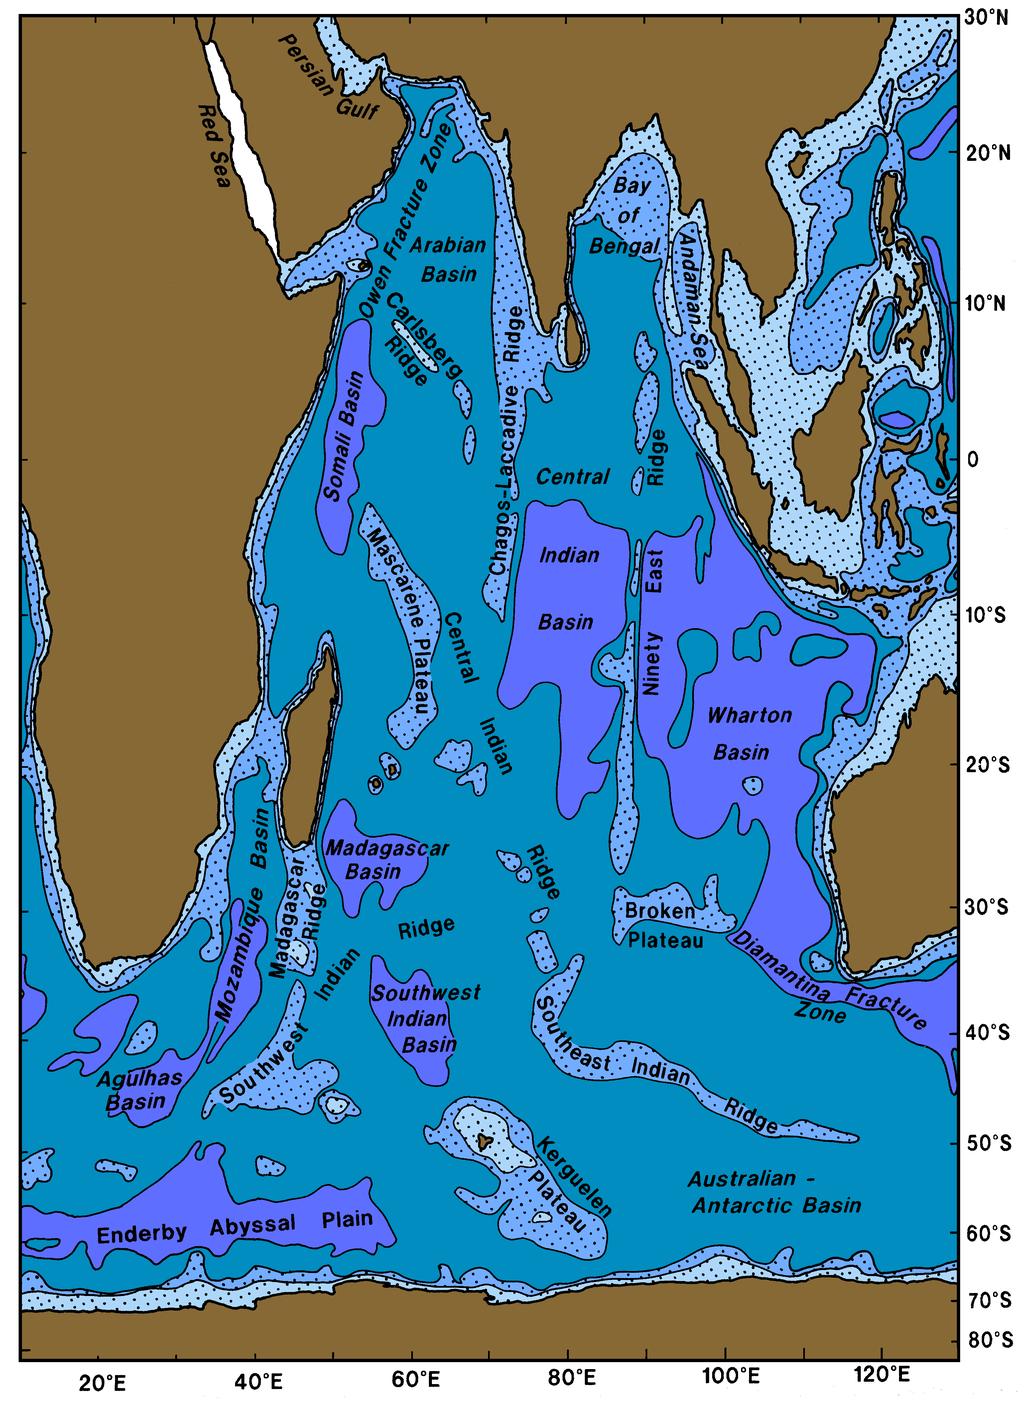 176 Regional Oceanography: an Introduction Fig. 11.1. Topography of the Indian Ocean.